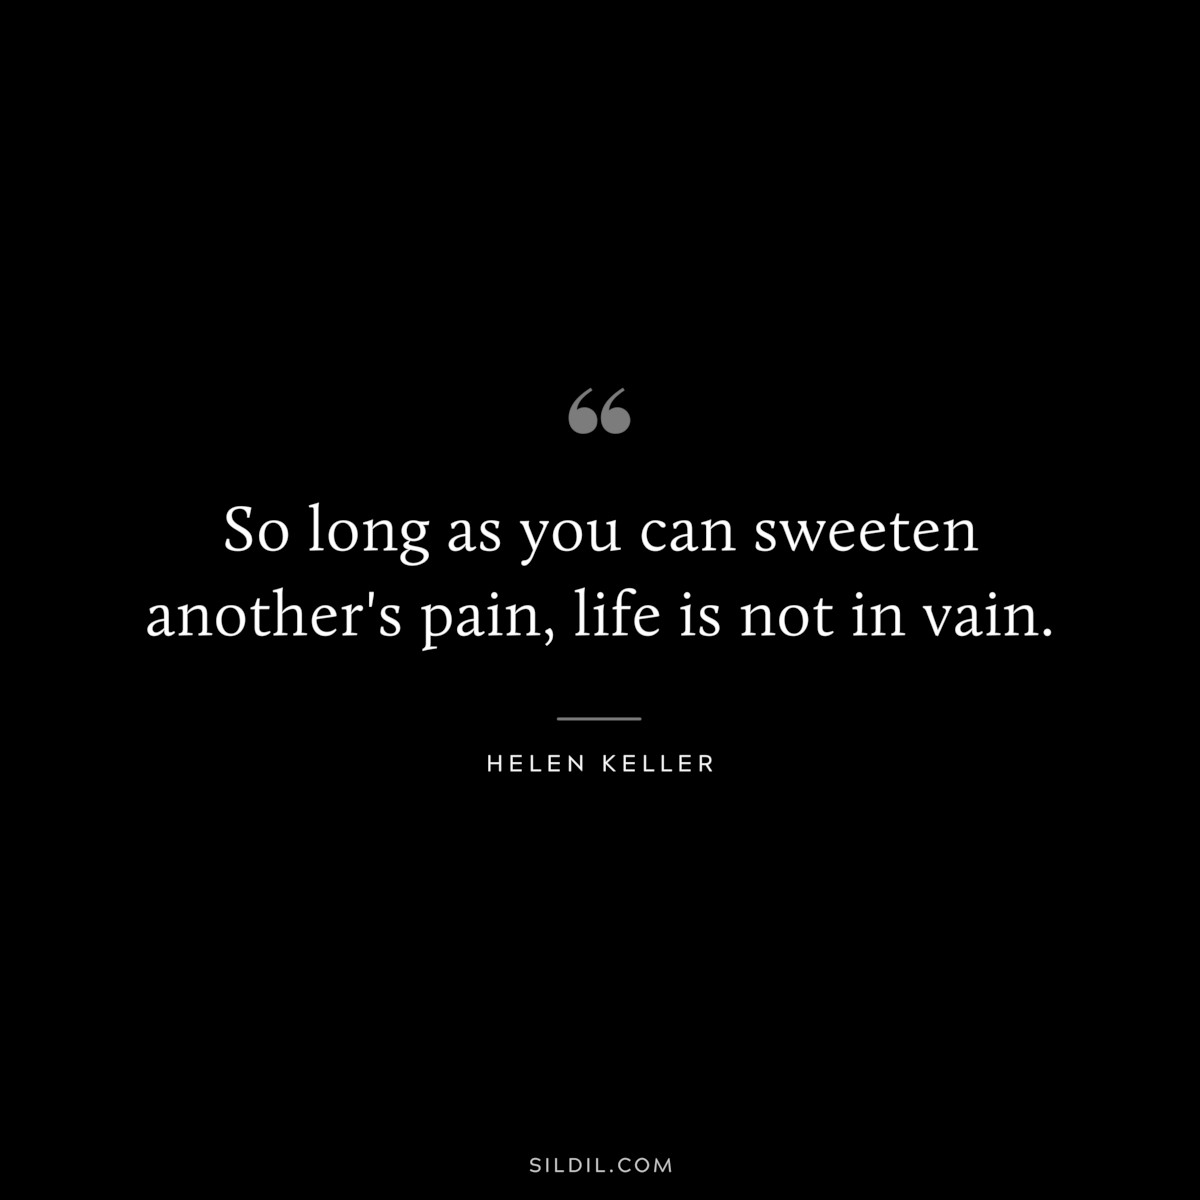 So long as you can sweeten another's pain, life is not in vain. ― Helen Keller